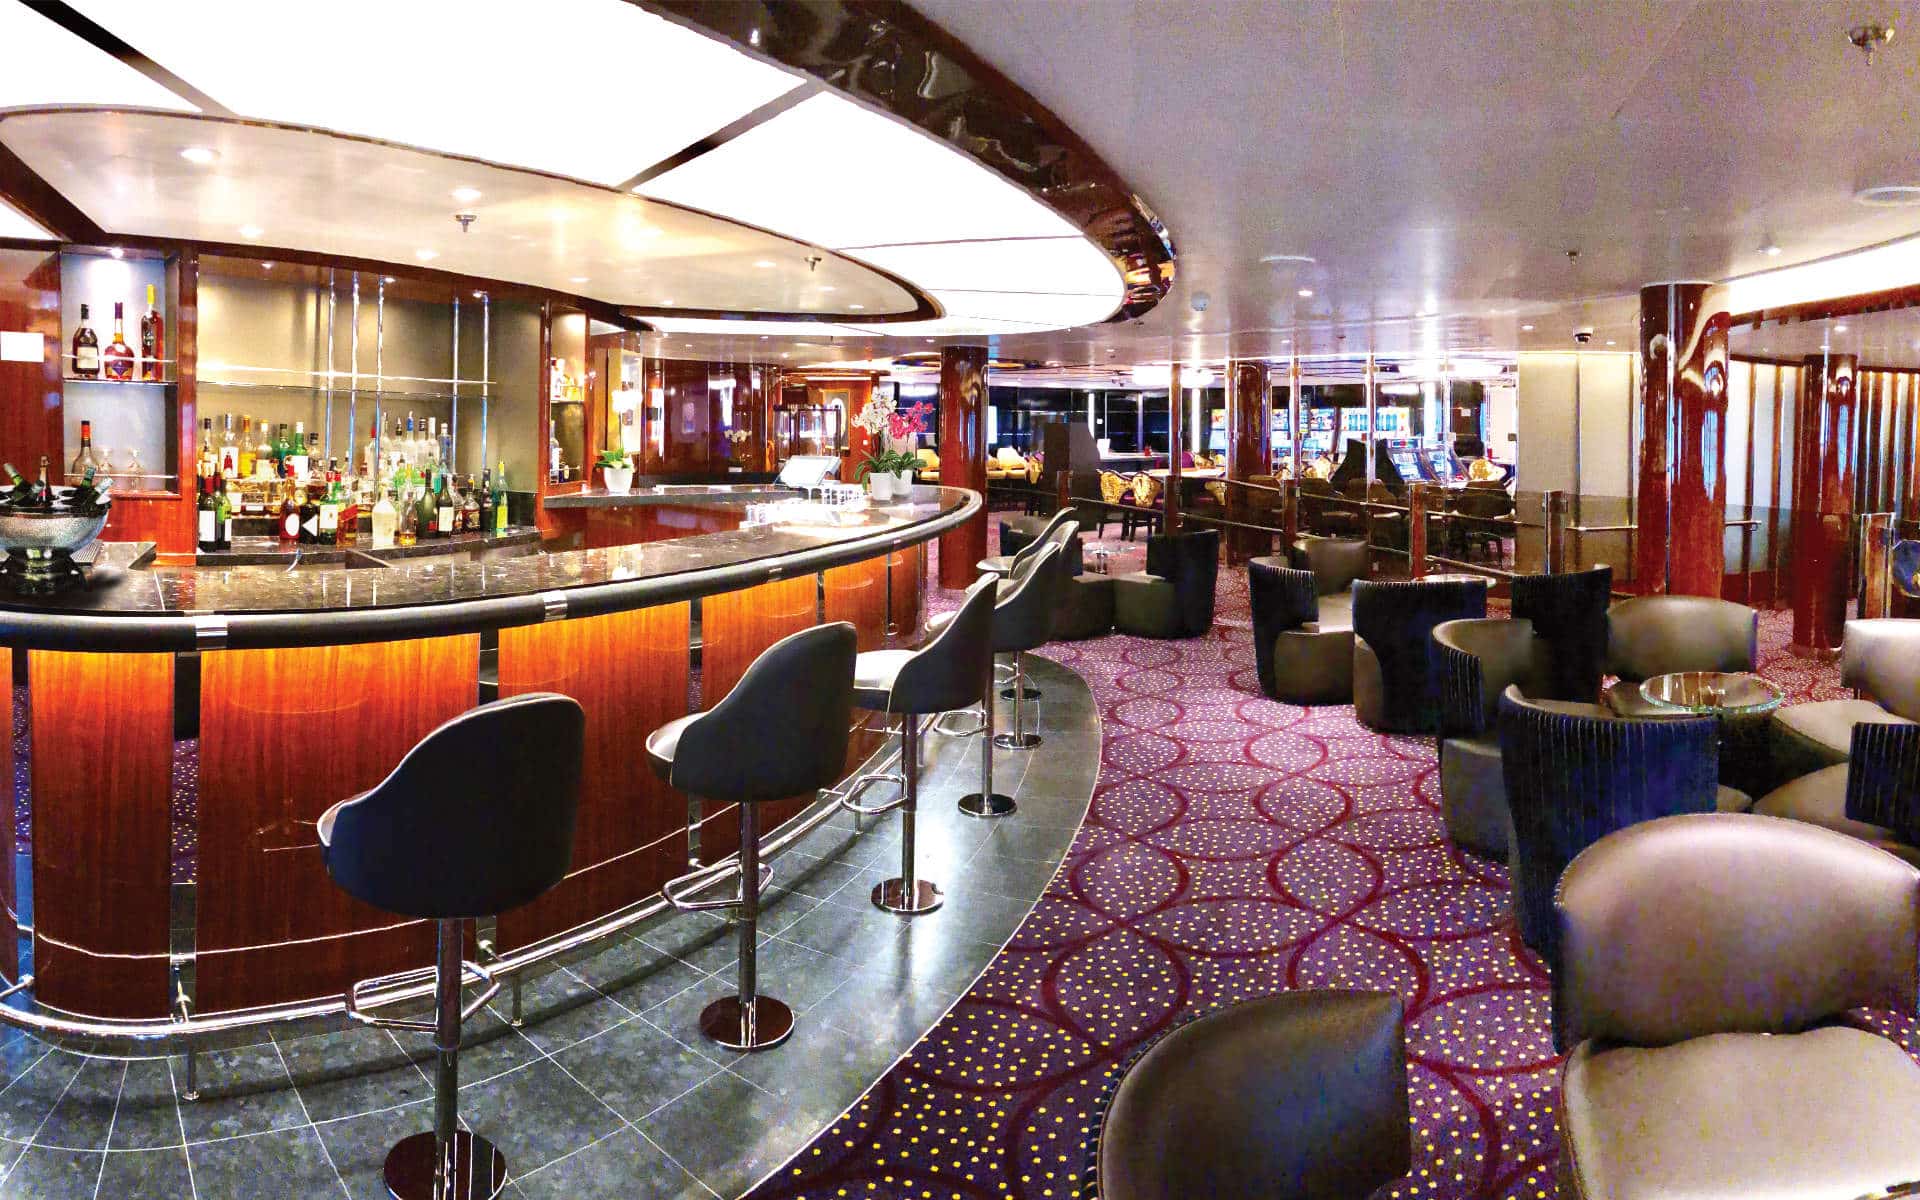 Seabourn Ovation bars include The Club.